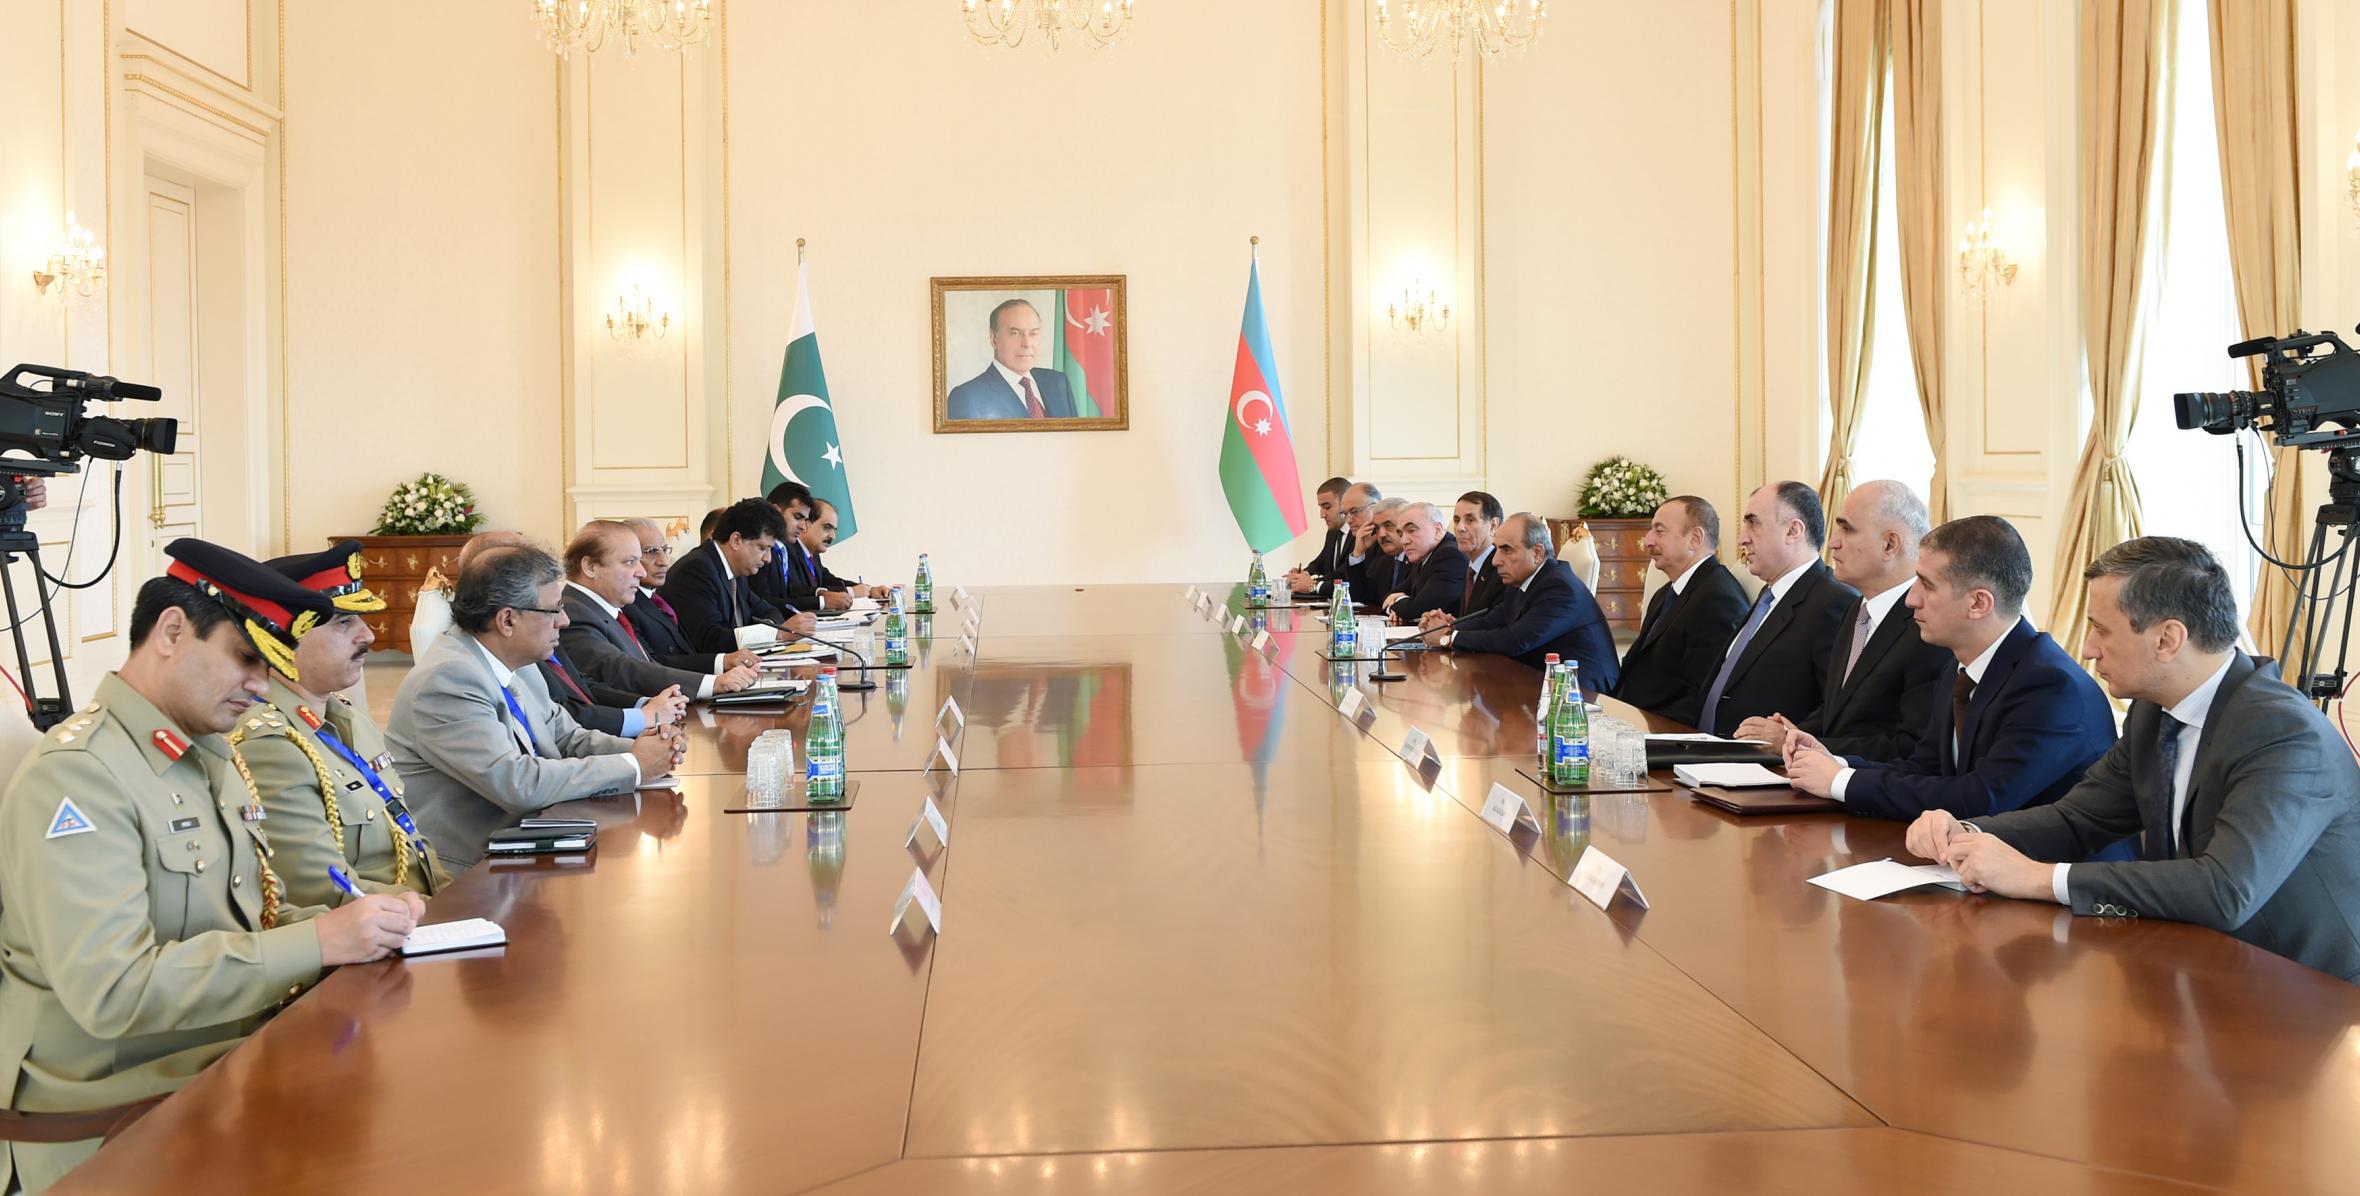 Ilham Aliyev and Prime Minister of Pakistan Muhammad Nawaz Sharif held an expanded meeting